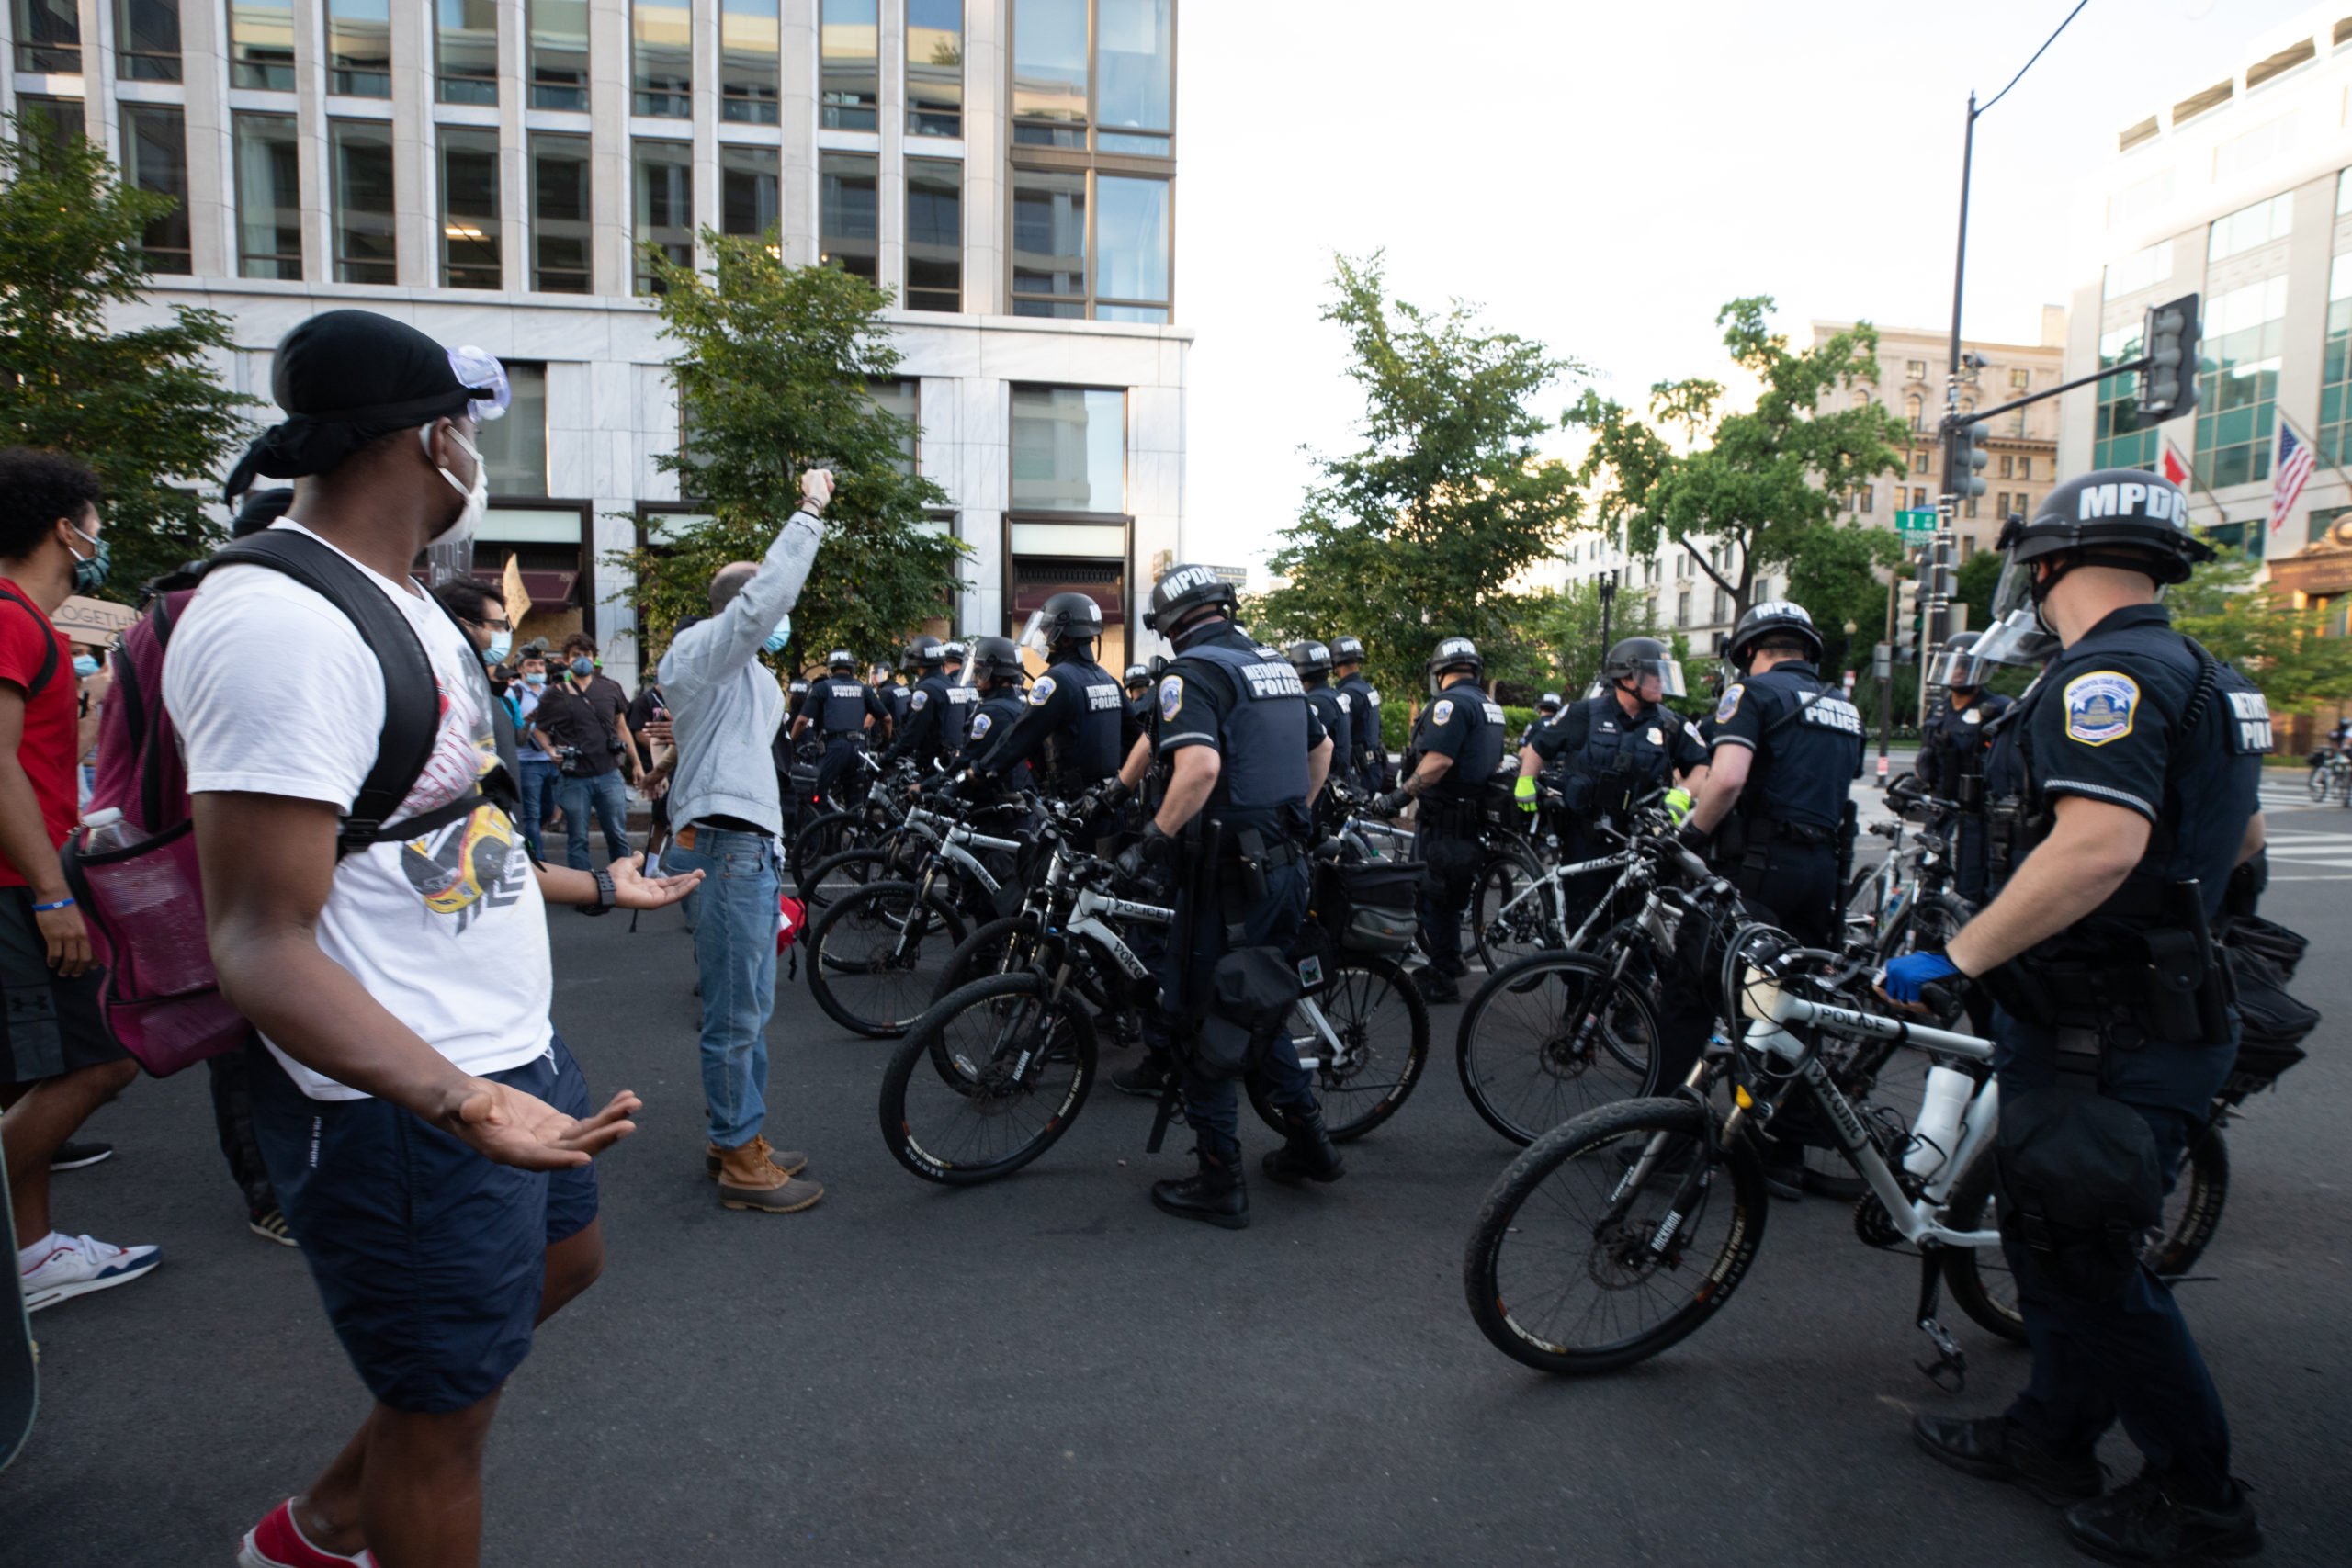 Protesters stand in front of a police bike line in Washington, D.C. on June 1, 2020. (Kaylee Greenlee - DCNF)